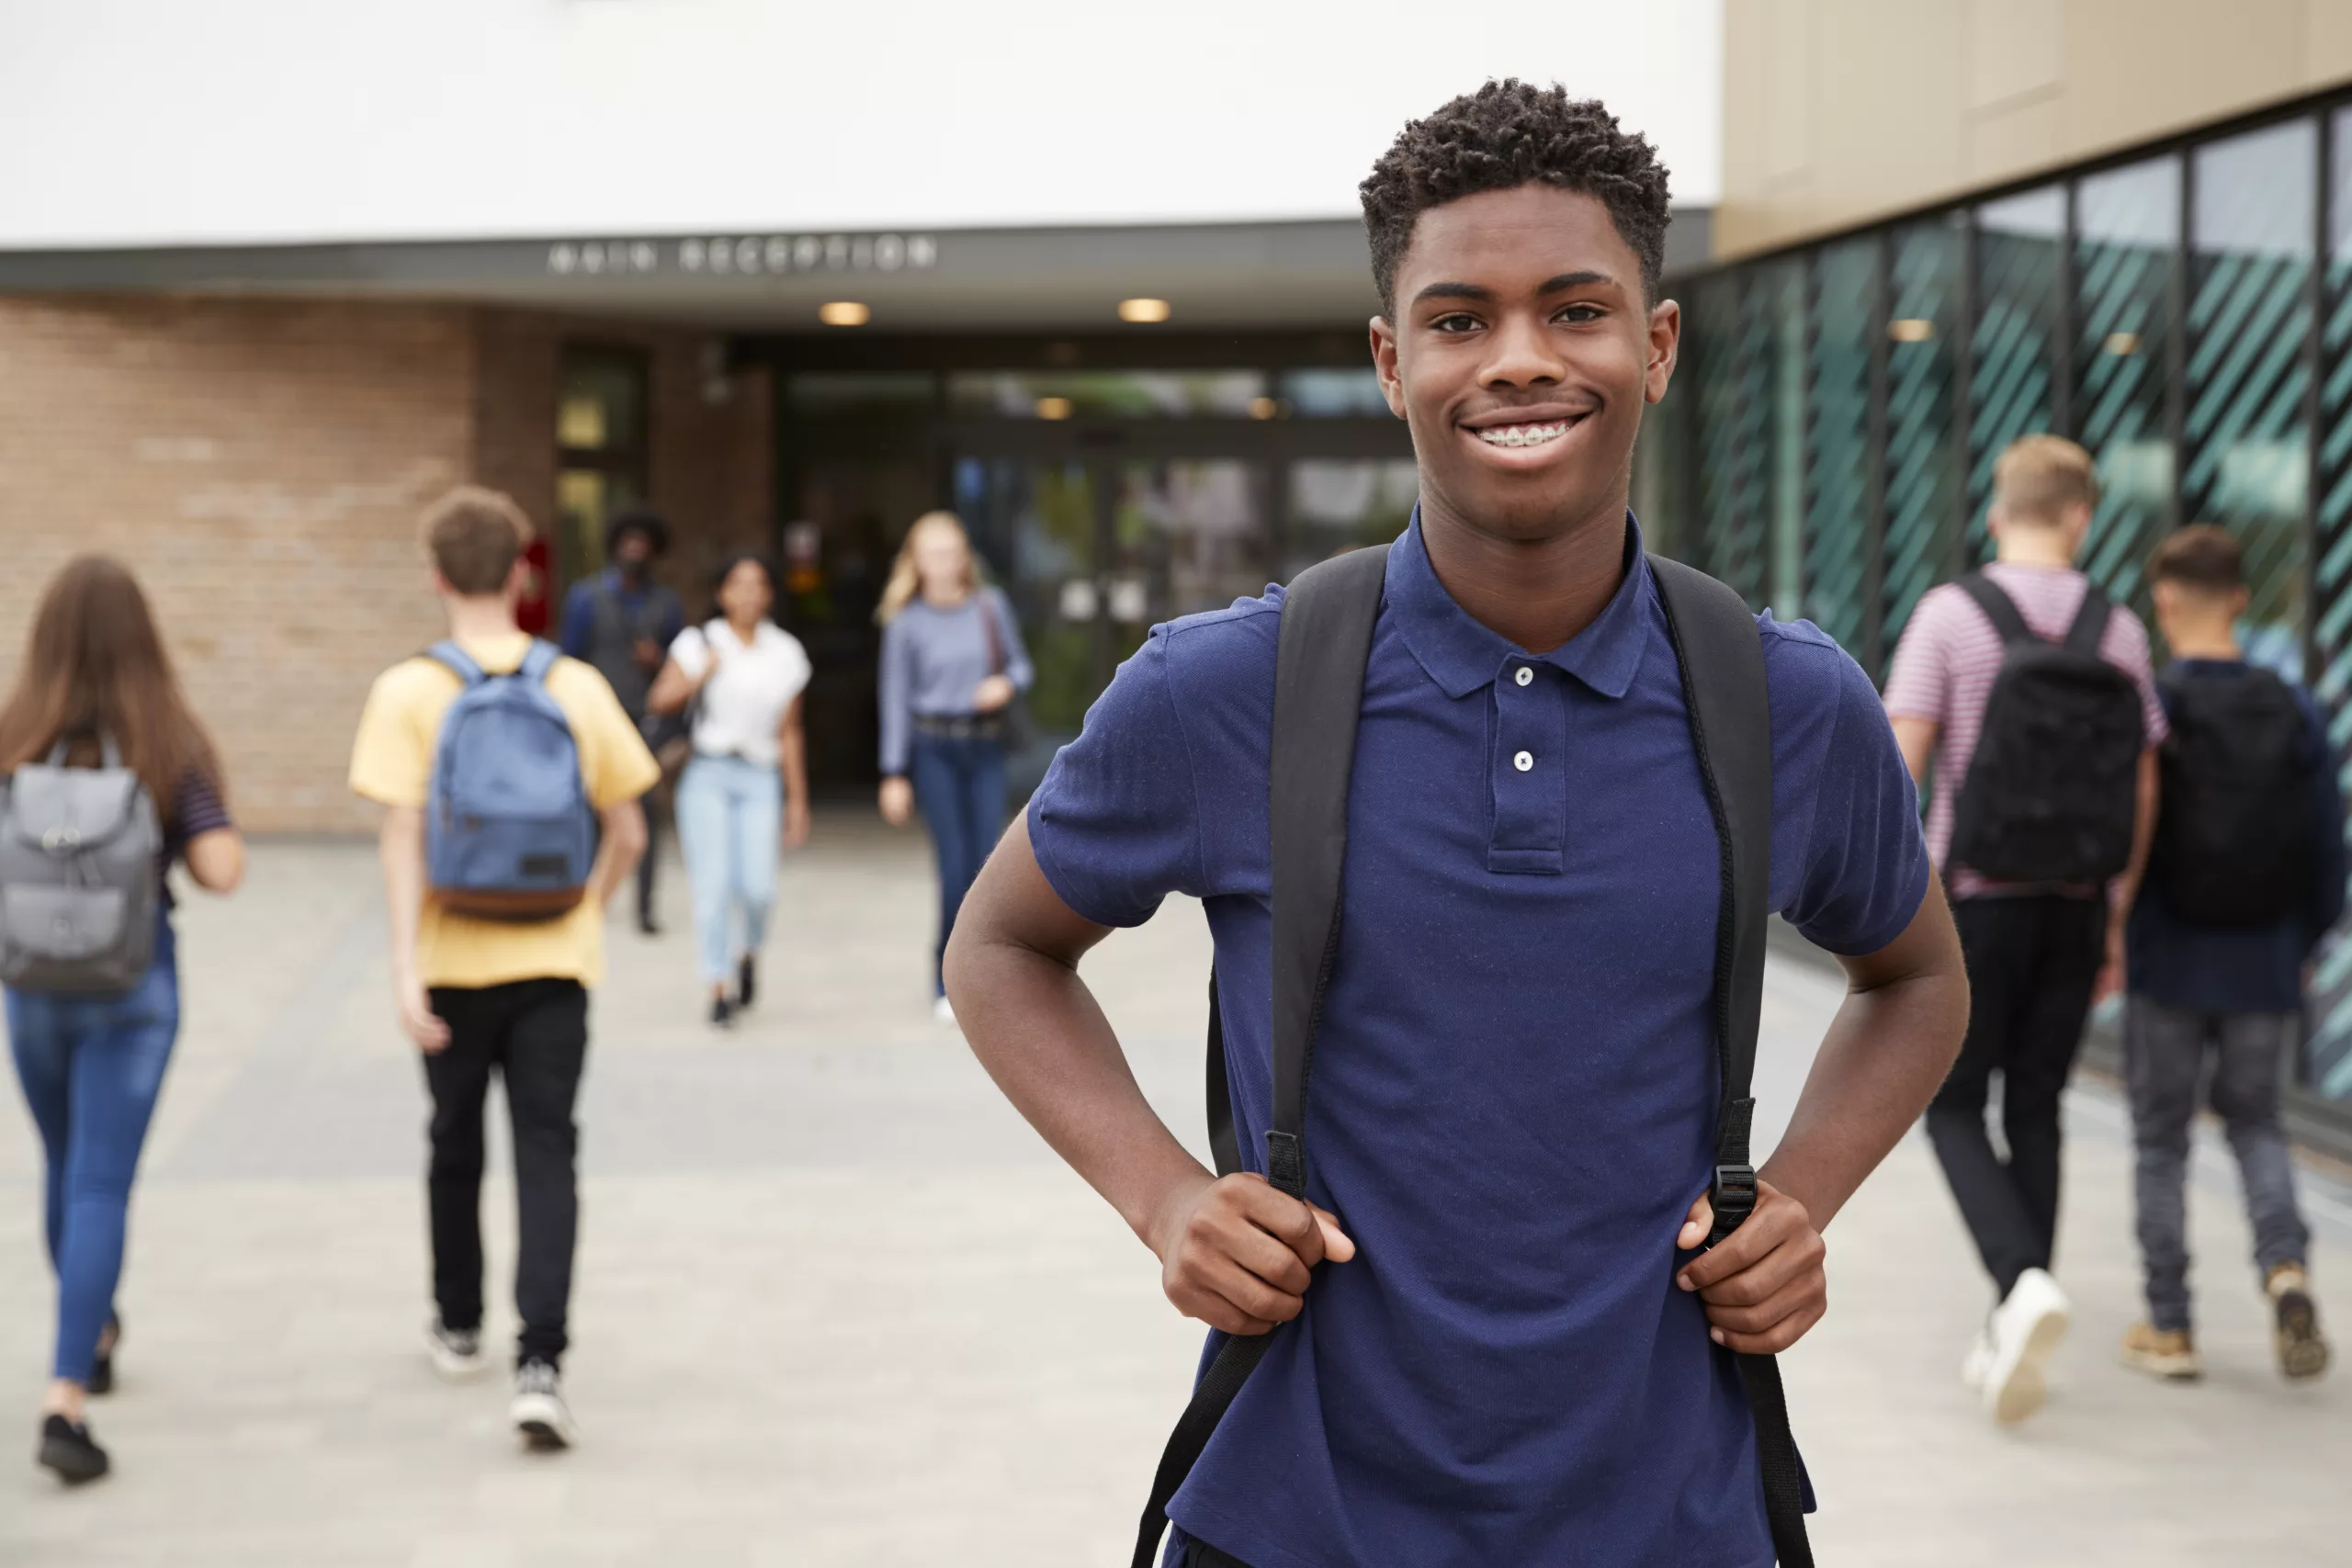 Student wearing a blue collared shirt posing with backpack, fellow students walking behind